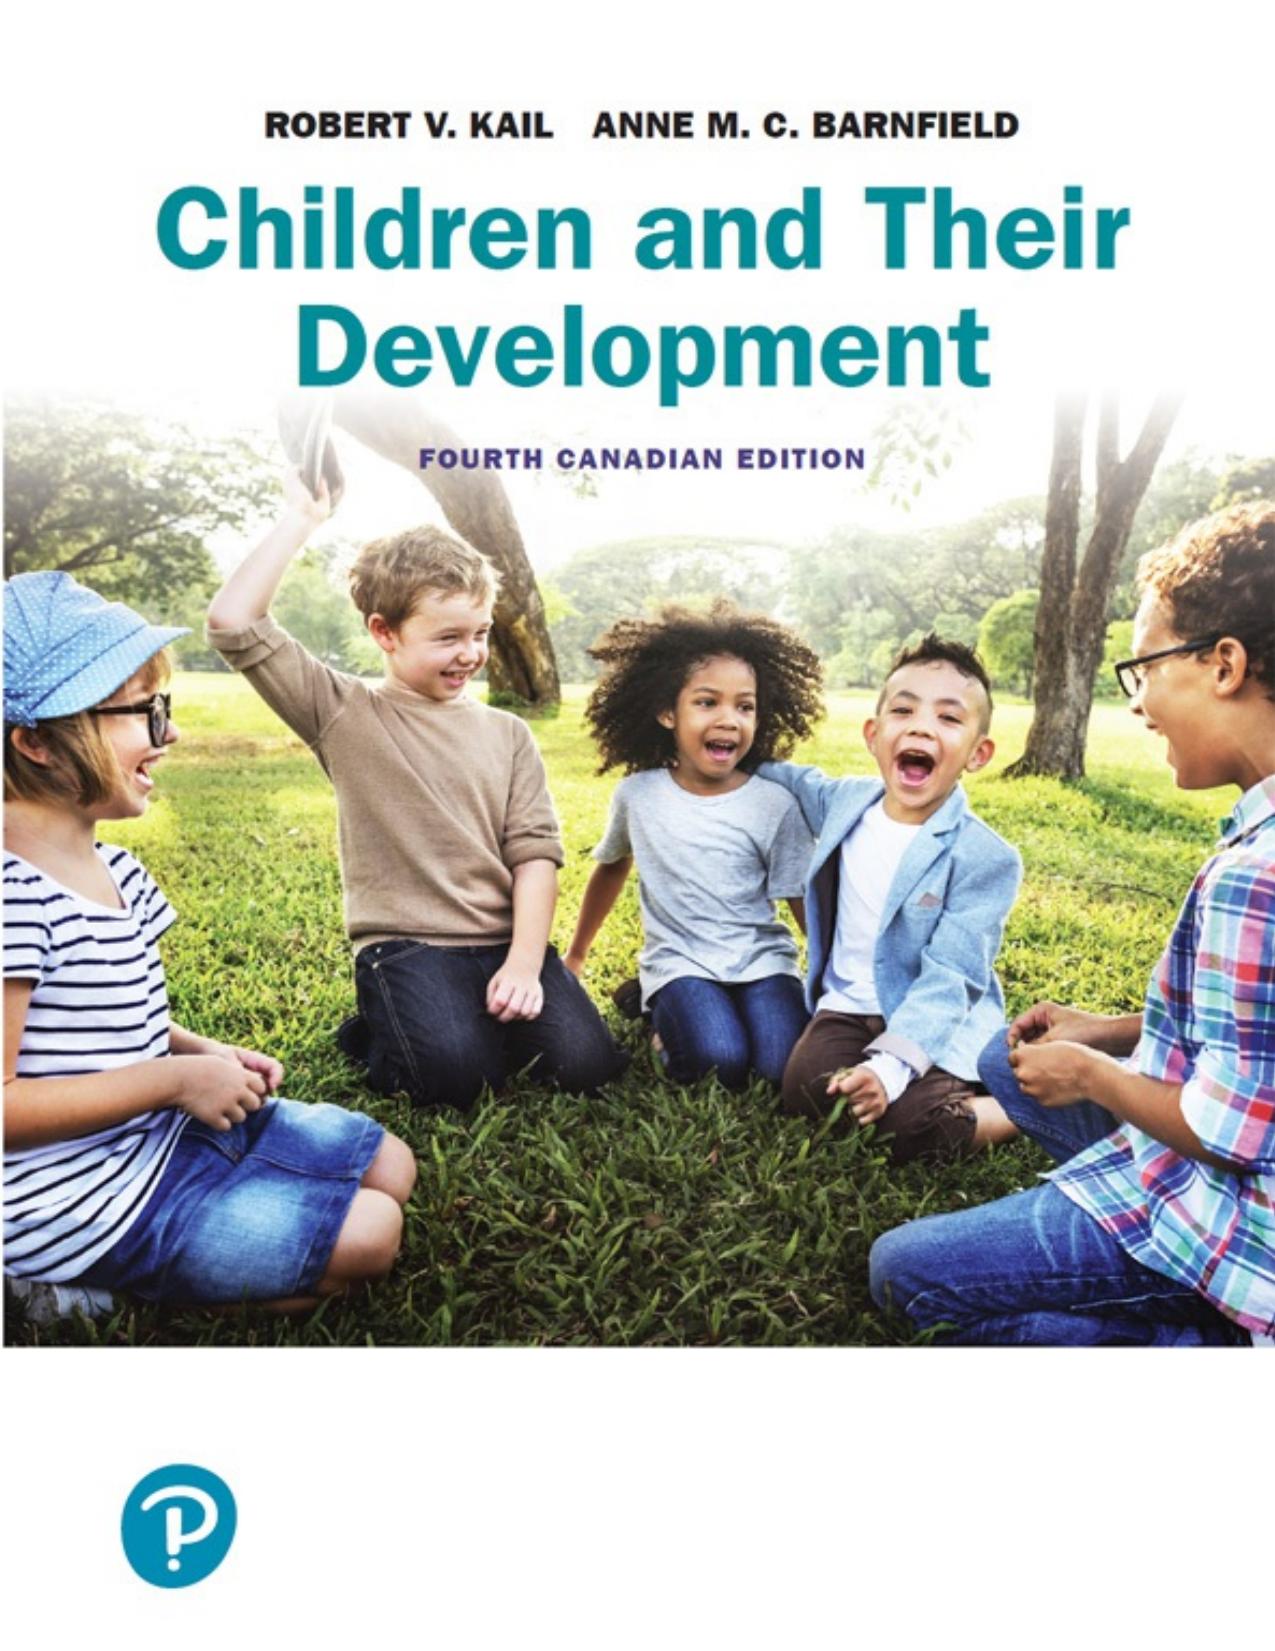 (eBook PDF)Children and Their Development, Fourth Canadian Edition by Robert V. Kail,Anne M.C. Barnfield